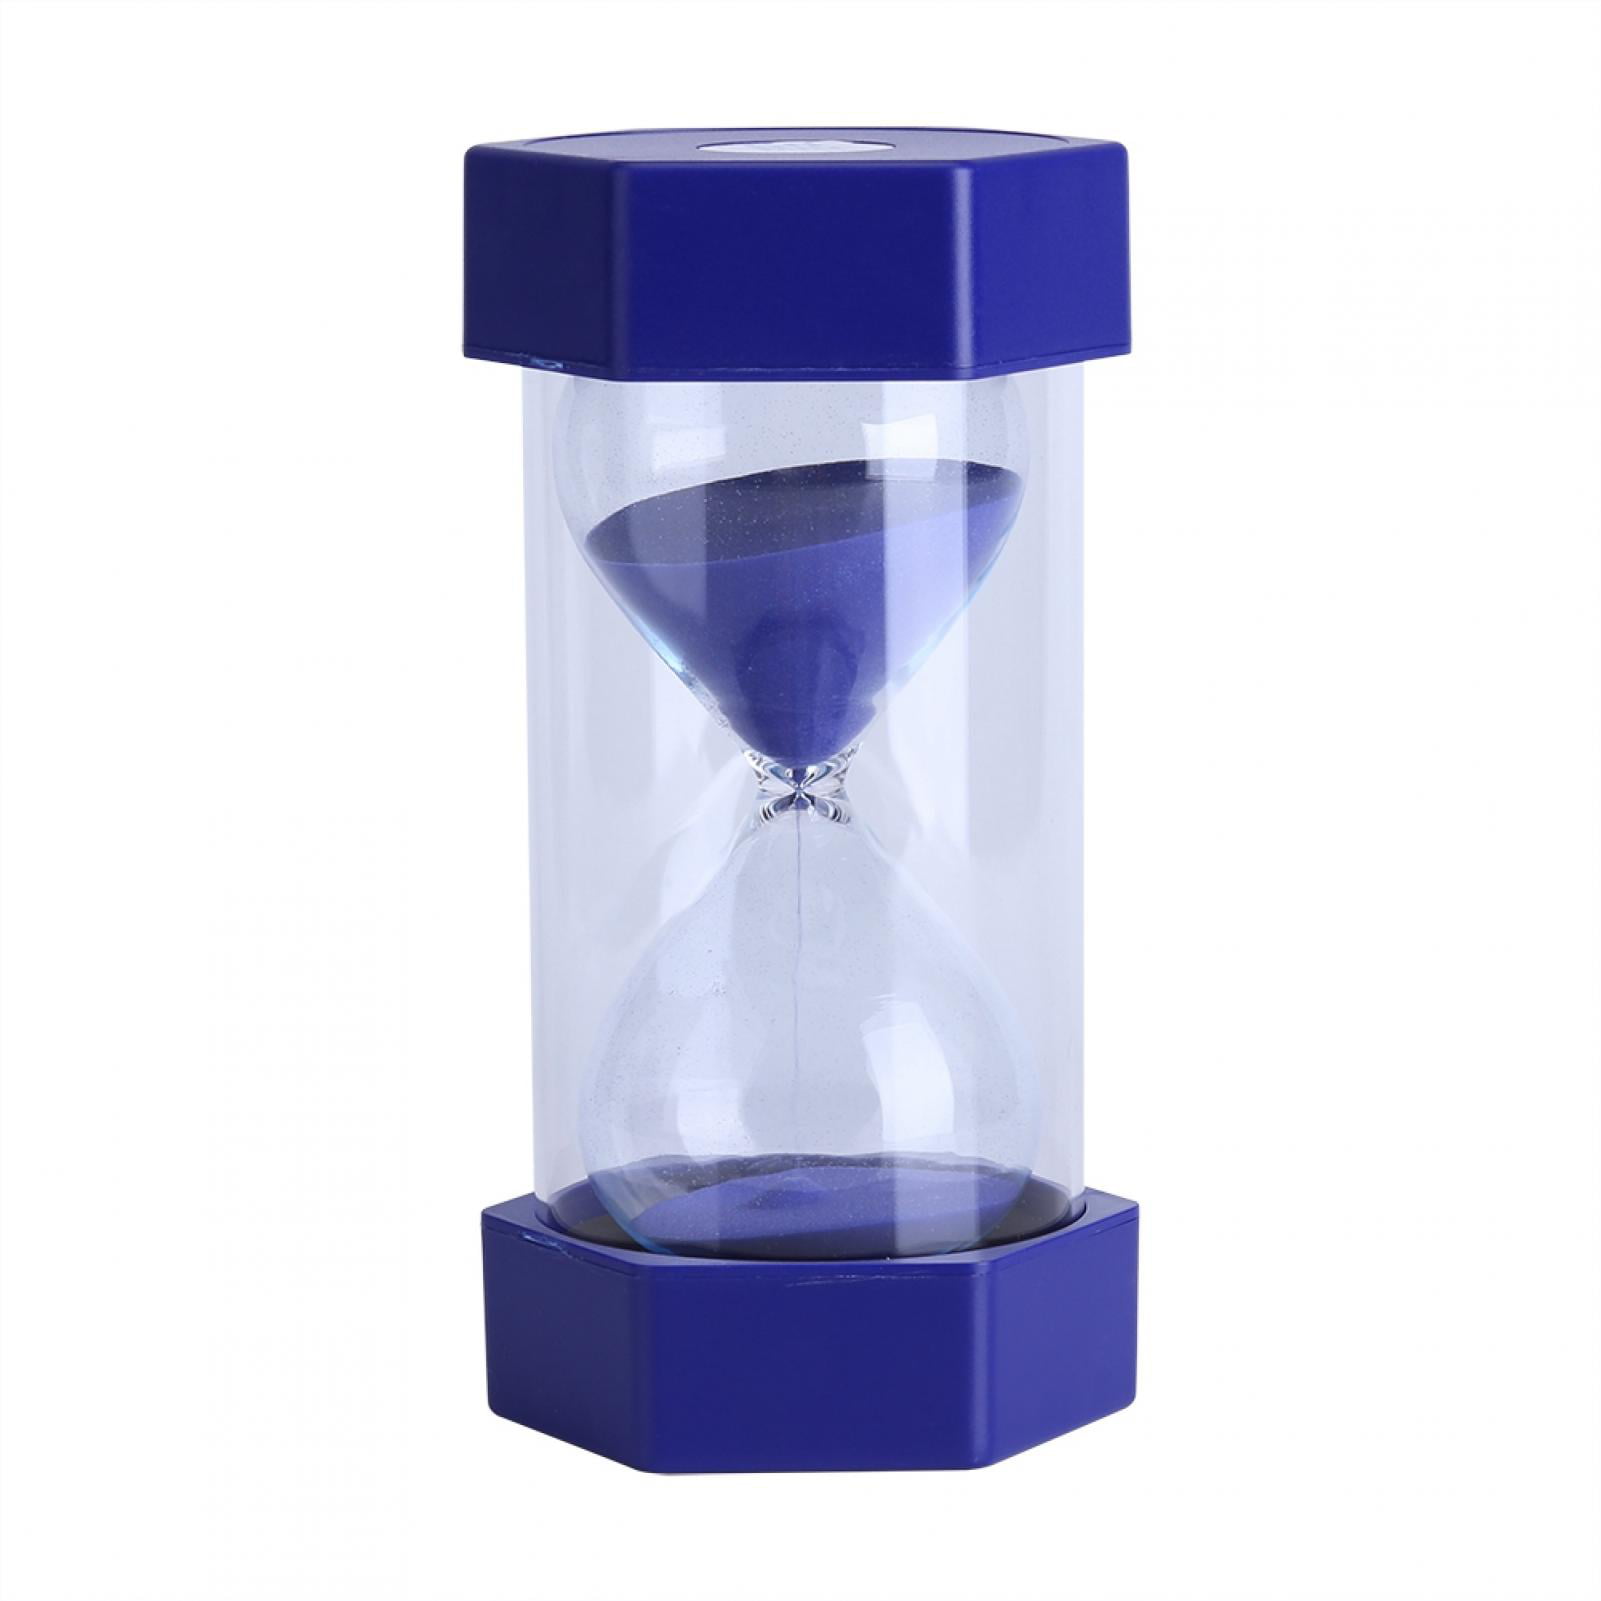 Colorful Hourglass Sandglass 30/60 min Sand Timer Clock Home Office Decor Gift